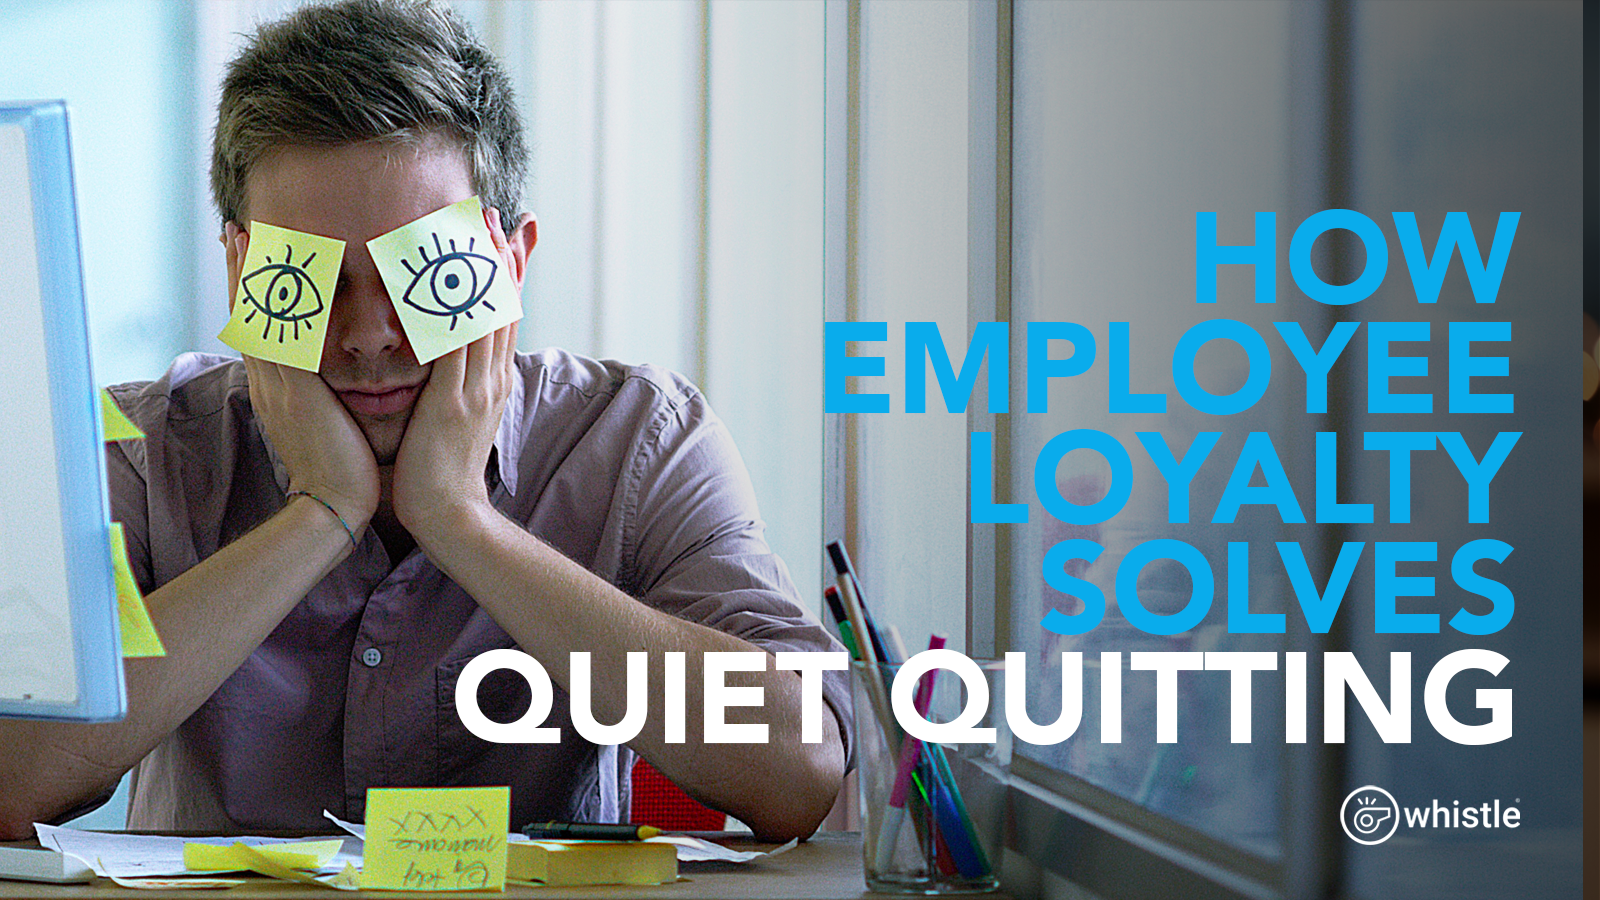 Quiet Quitting and How Employee Loyalty can reduce it